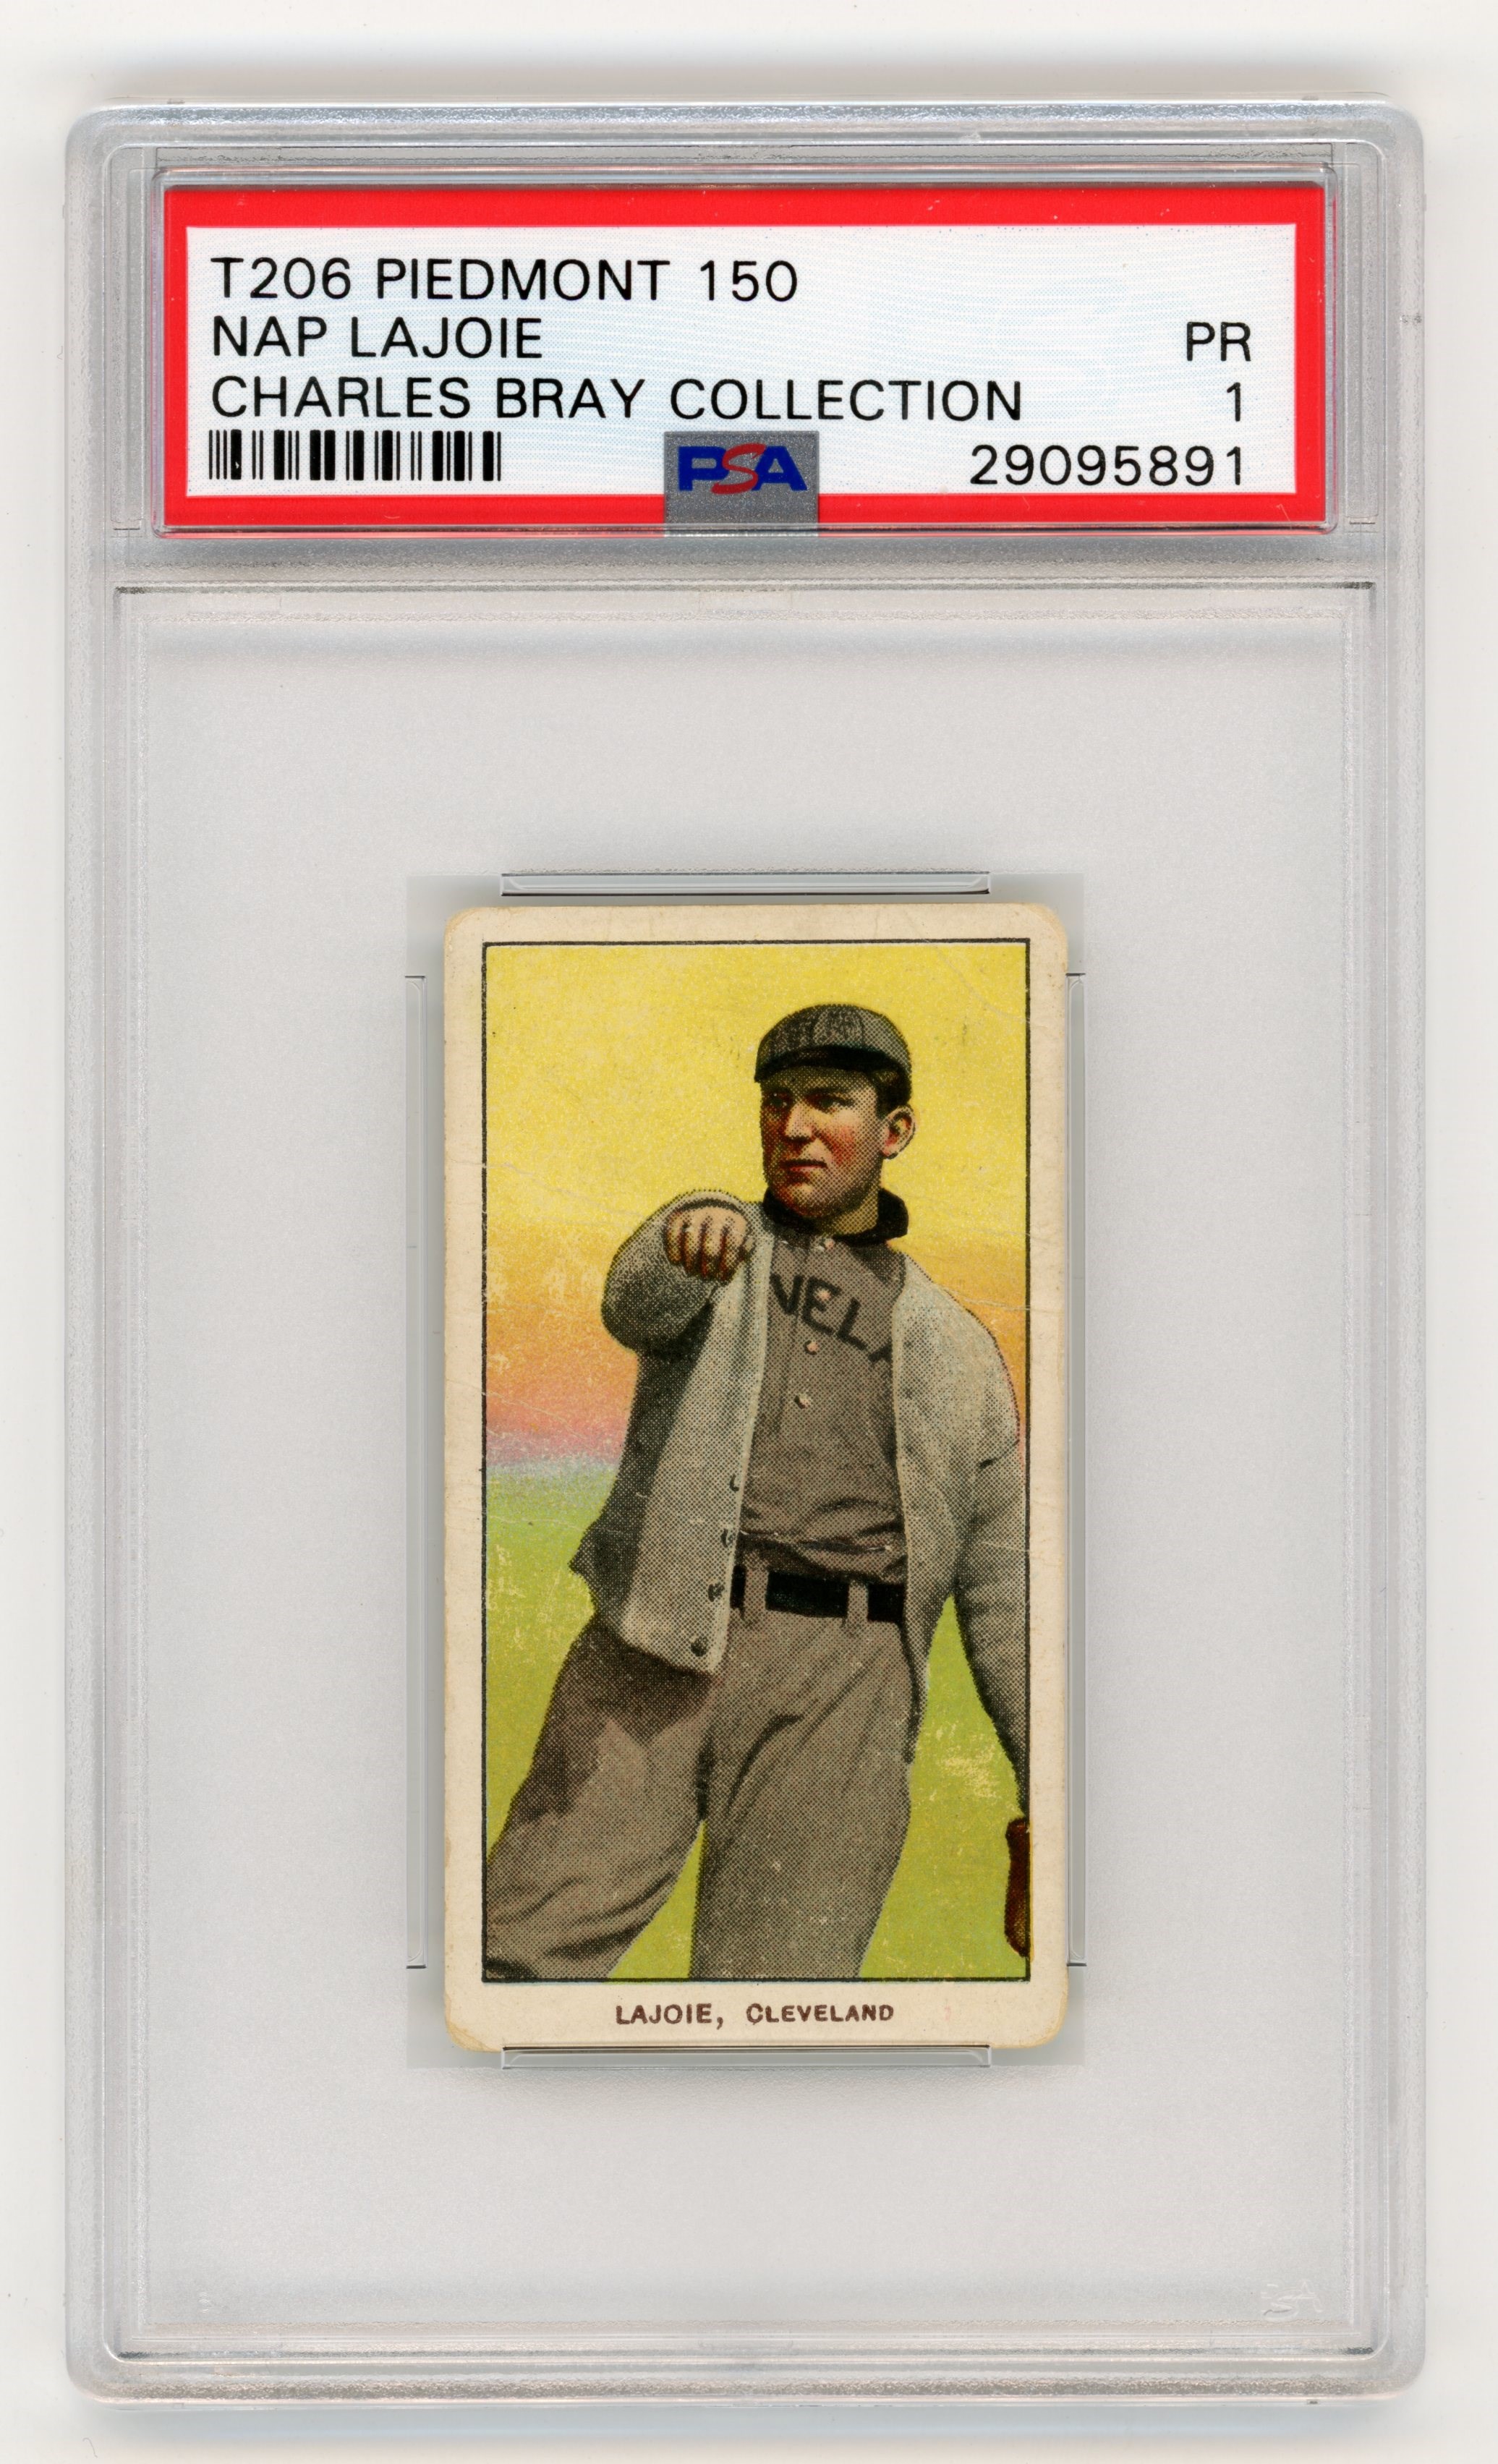 - T206 Piedmont 150 Nap Lajoie PSA 1 From Charles Bray Collection